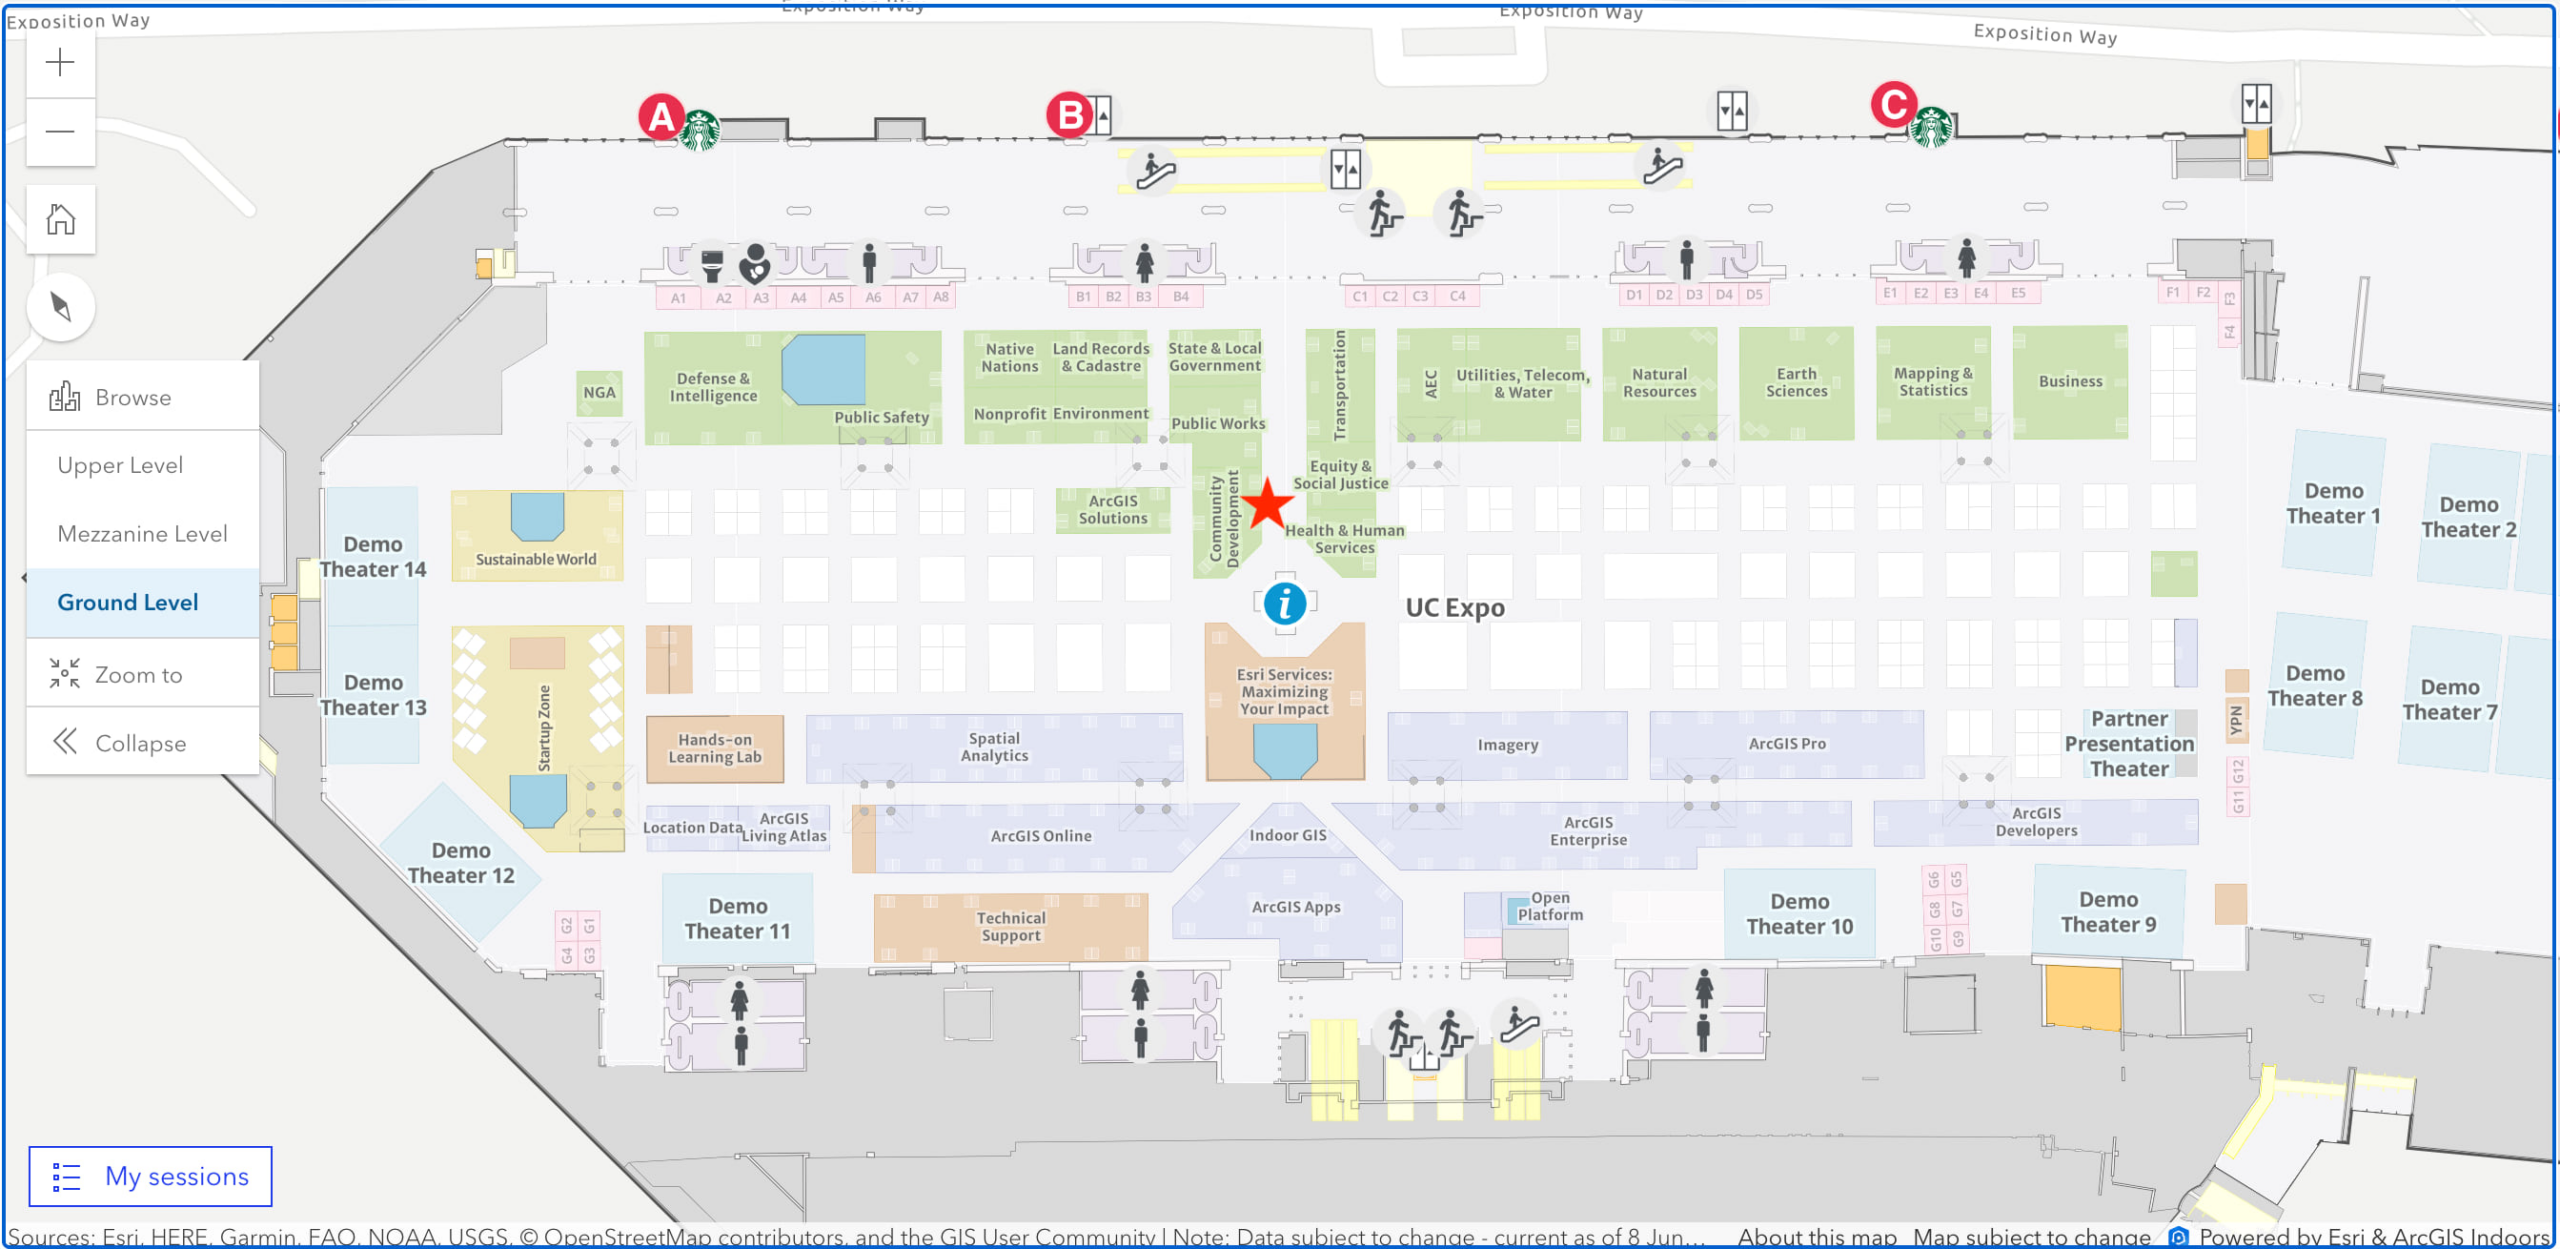 A map of the San Diego Convention Center that shows vendor, session, and speciality booth locations.